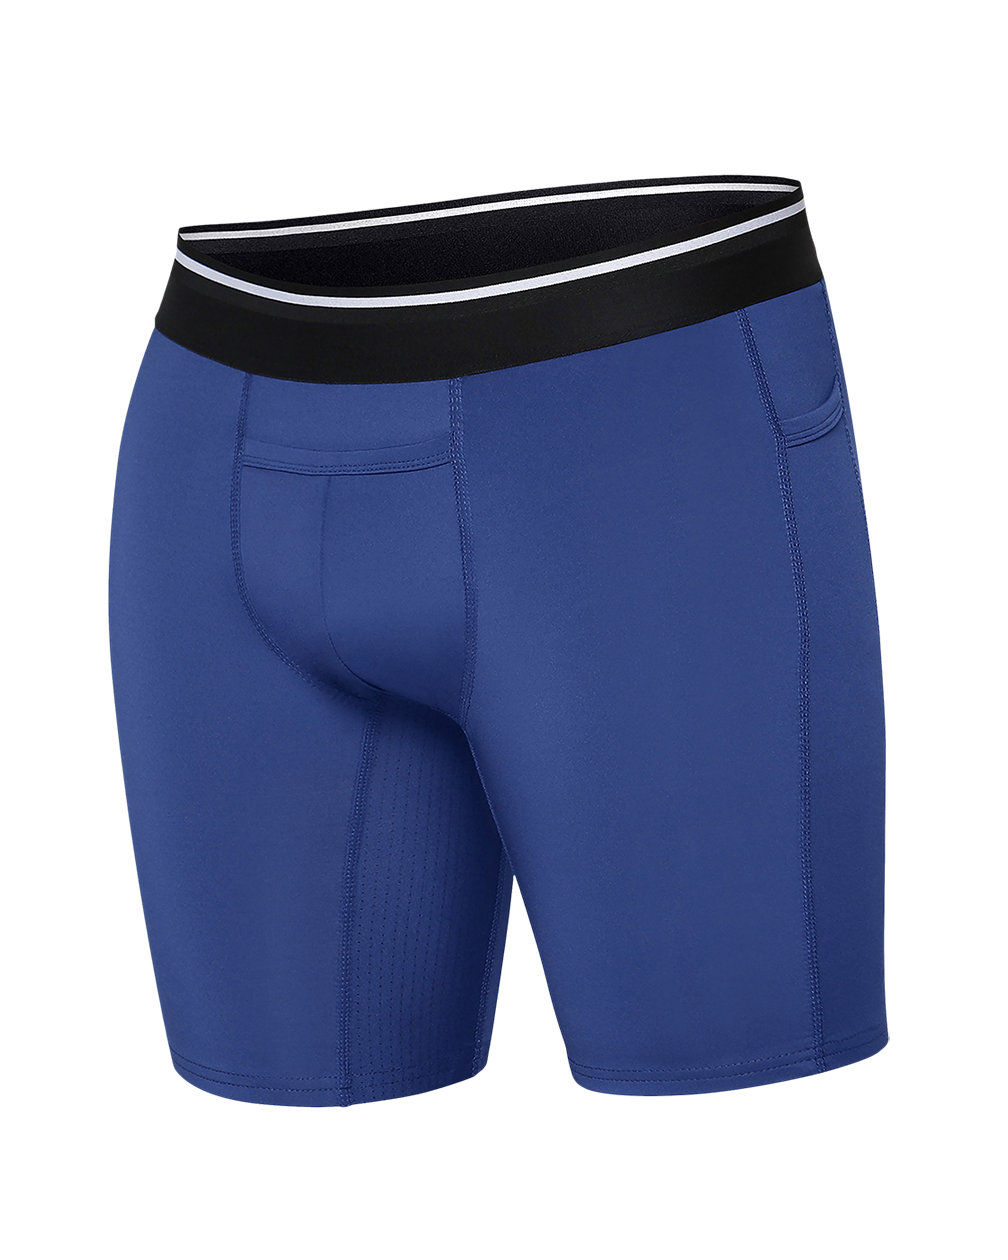 Endurance Compression Shorts for Men– Athletic Baselayer|All Citizens